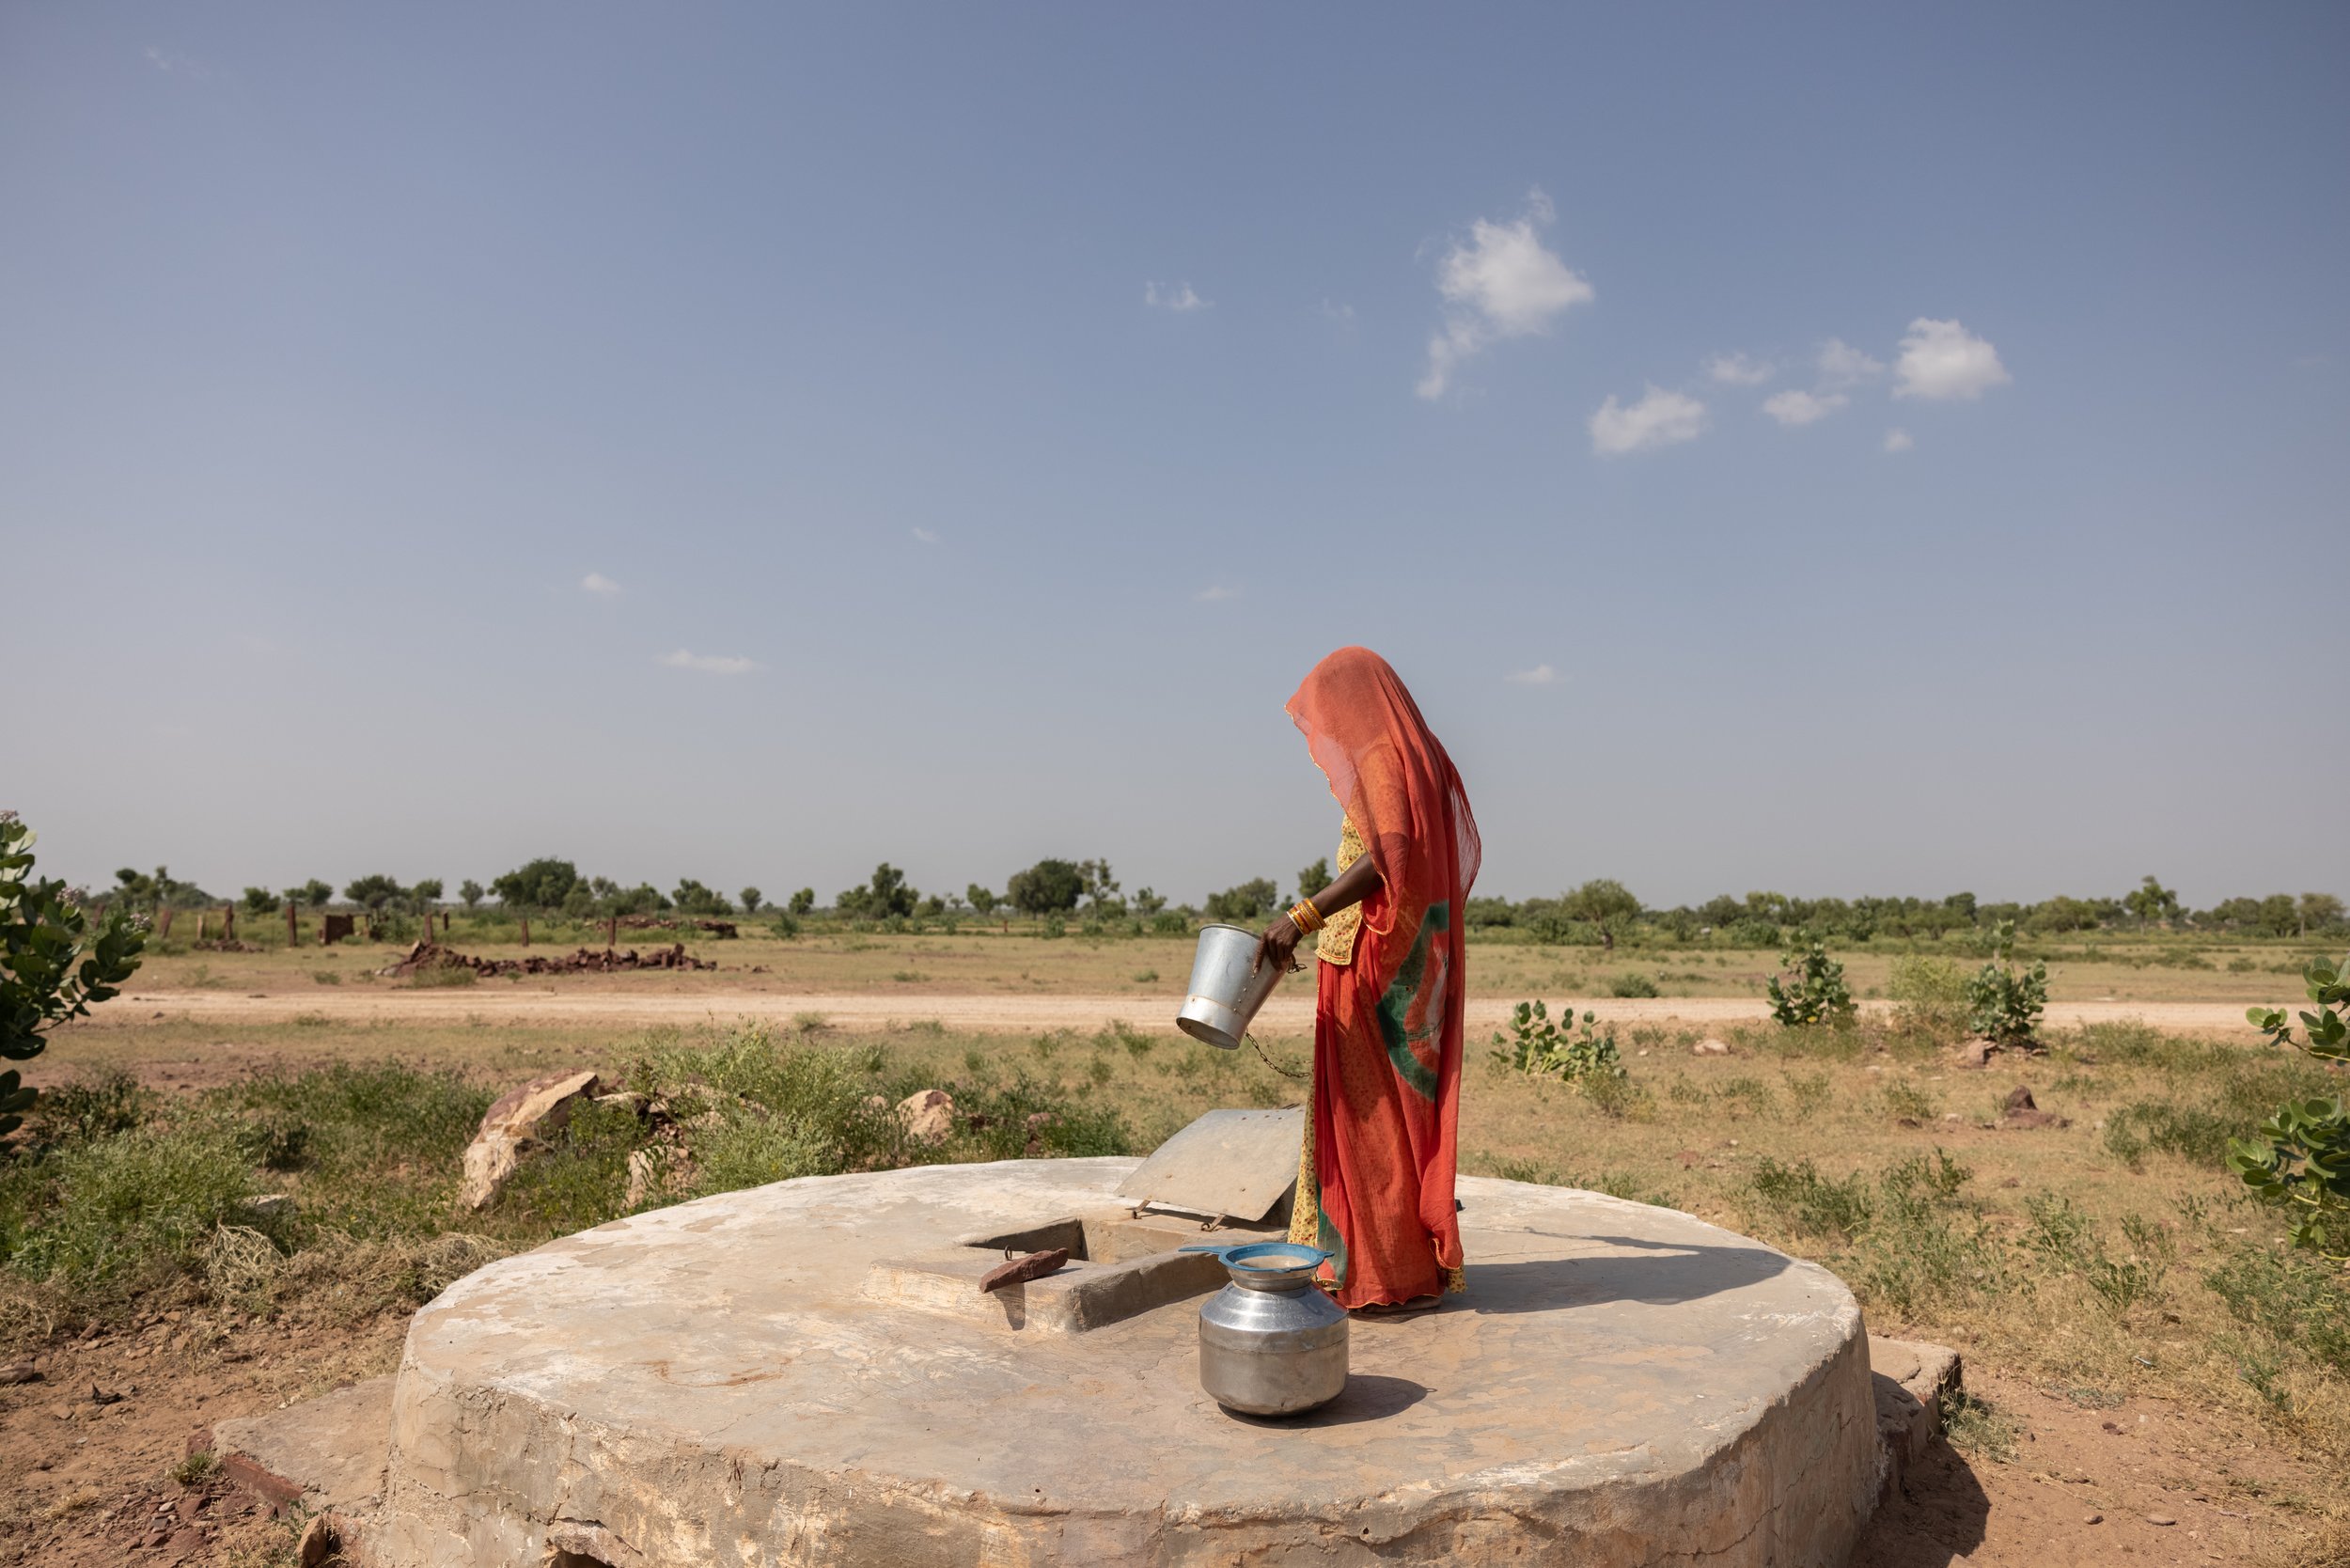 Mirgo collecting water from the rainwater harvesting tank outside her home.